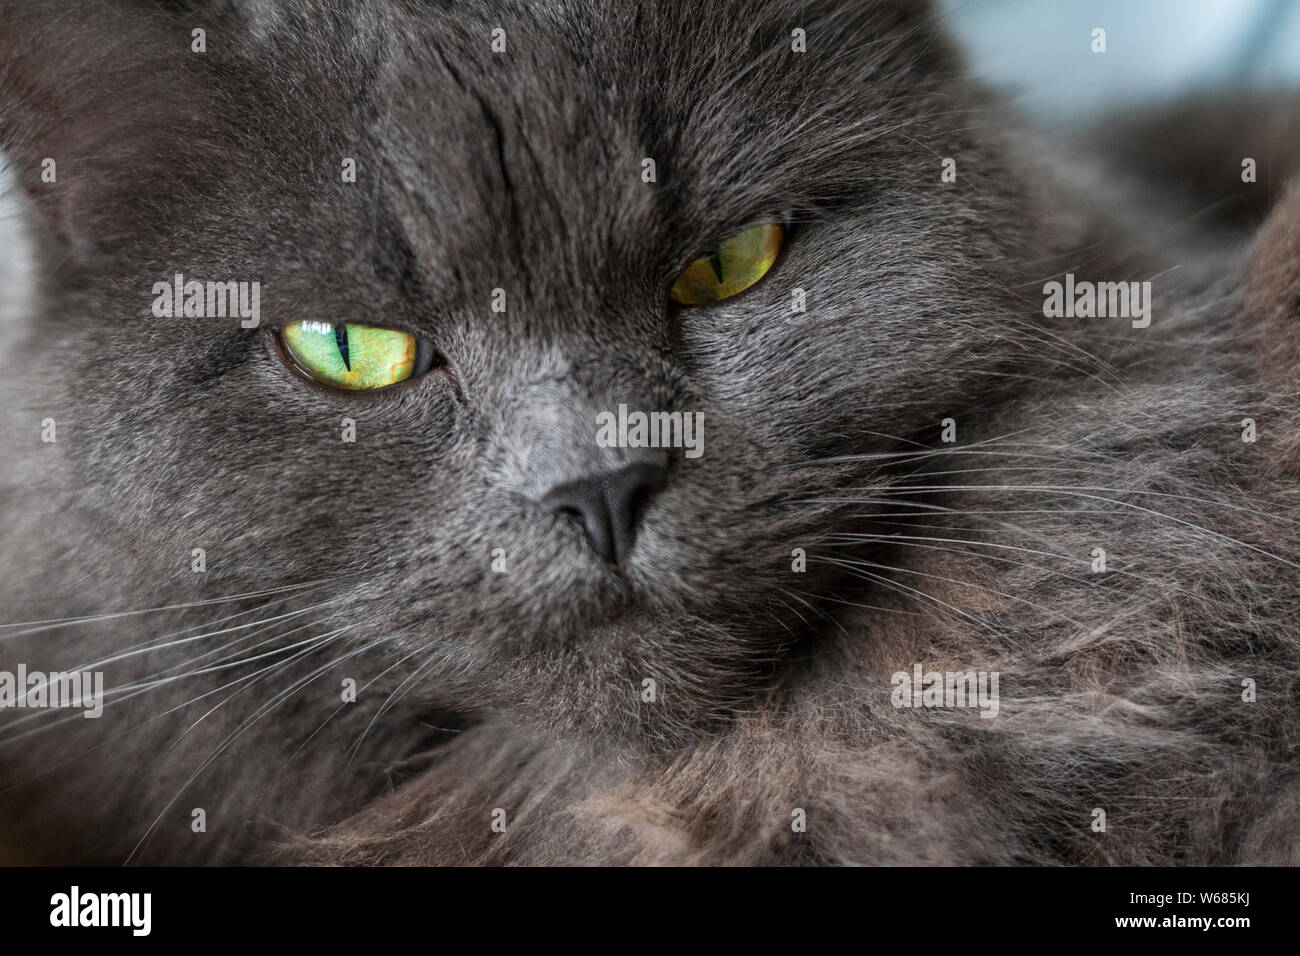 Head and face of long haired British Blue Cat Stock Photo